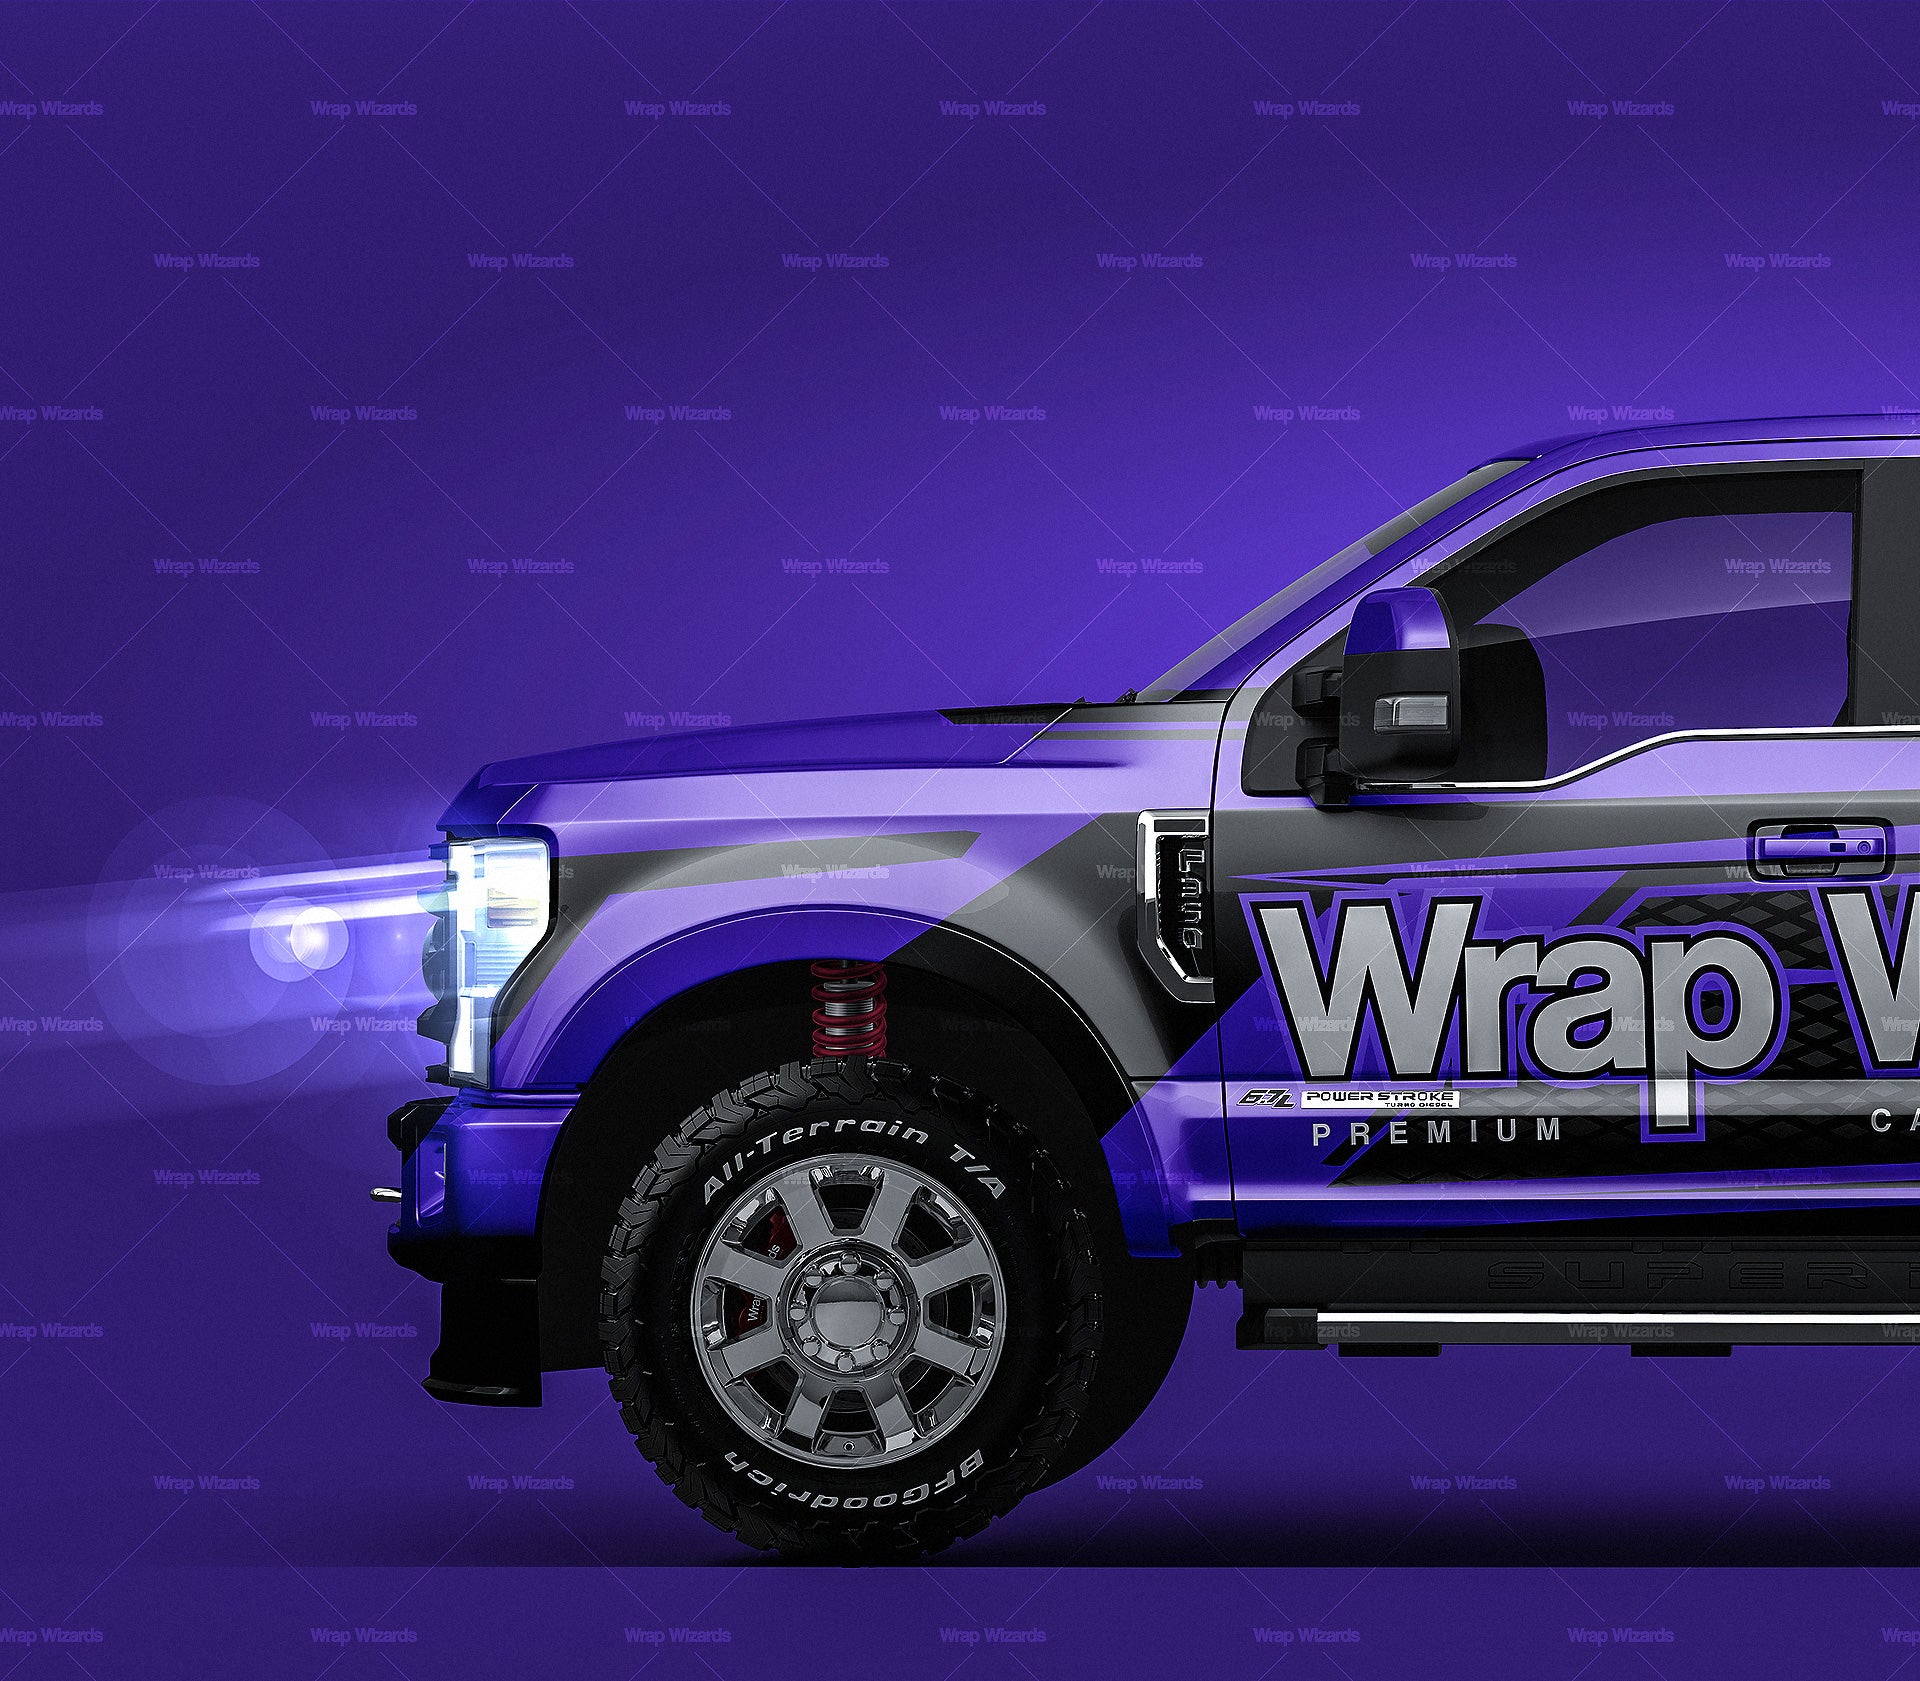 Ford F350 Super Duty 2020 glossy finish - all sides Car Mockup Template.psd